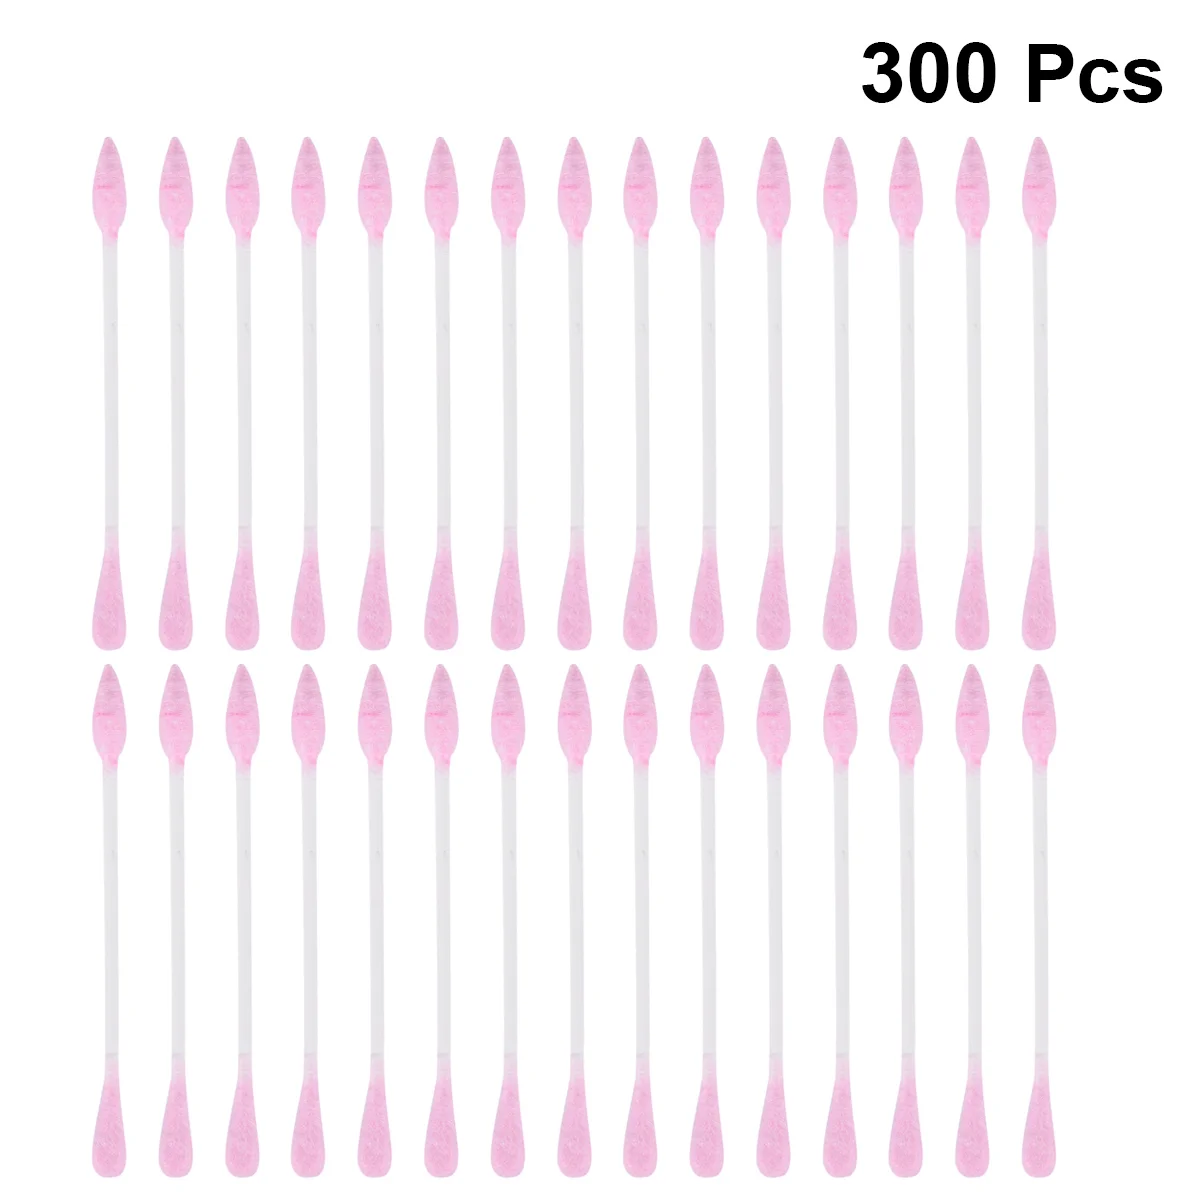 

3 Packs/300pcs Pink Ear Plugs Cotton Swabs Household Travel Beauty Accessories Makeup Tool